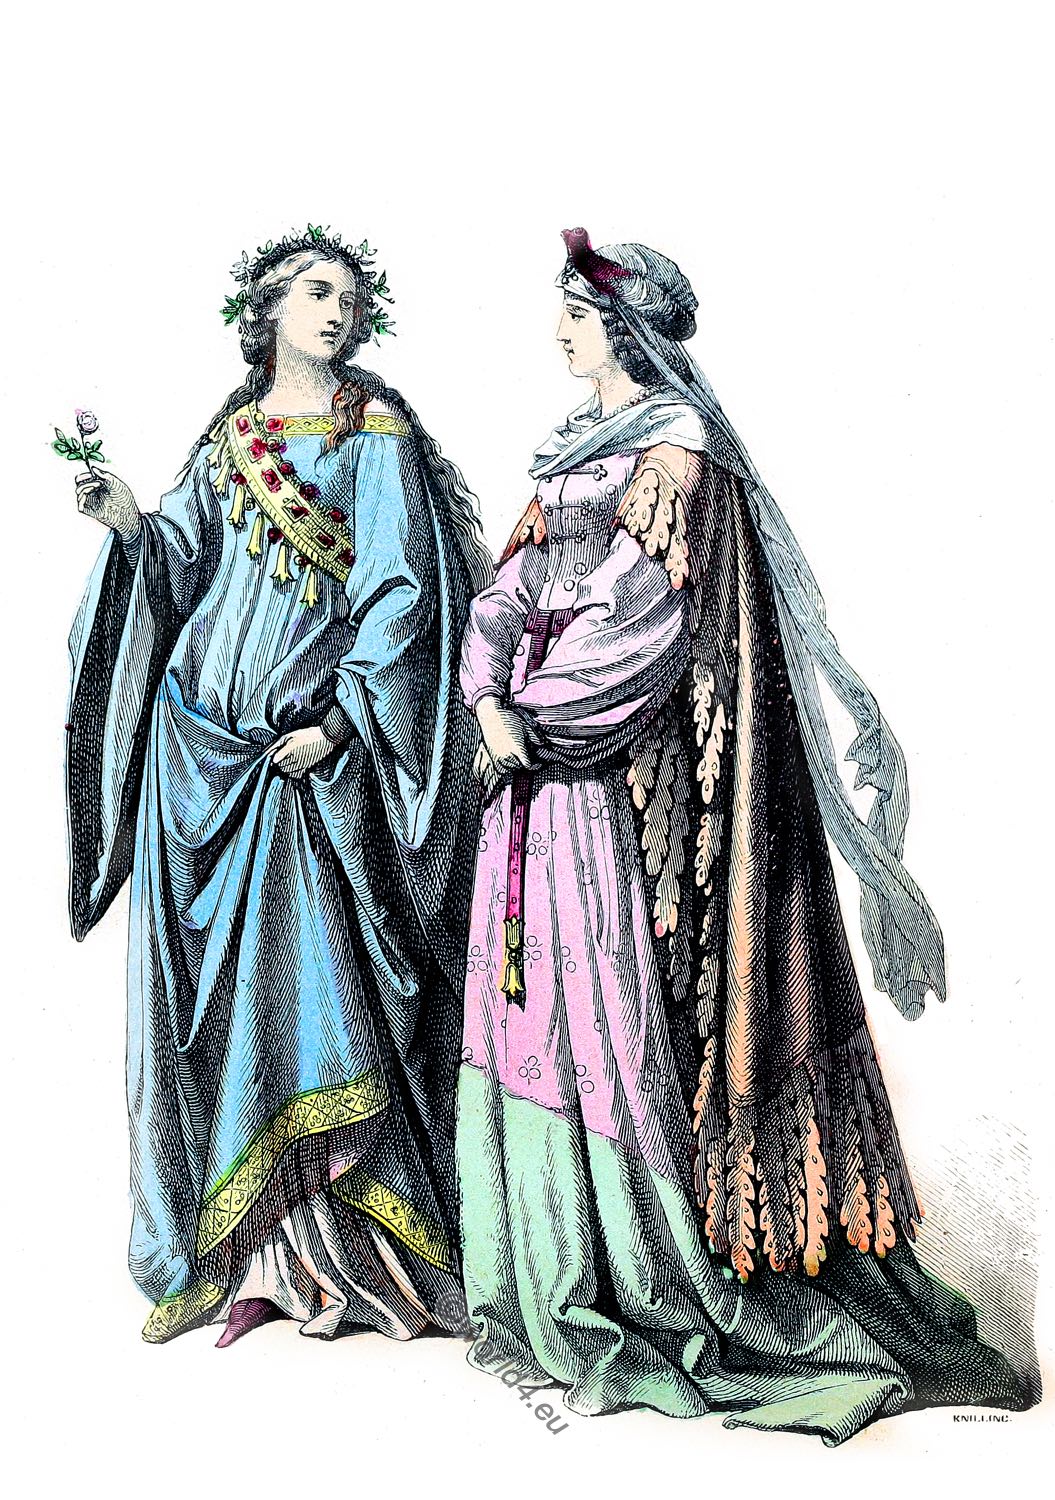 German, court, costumes,, middle ages, fashion